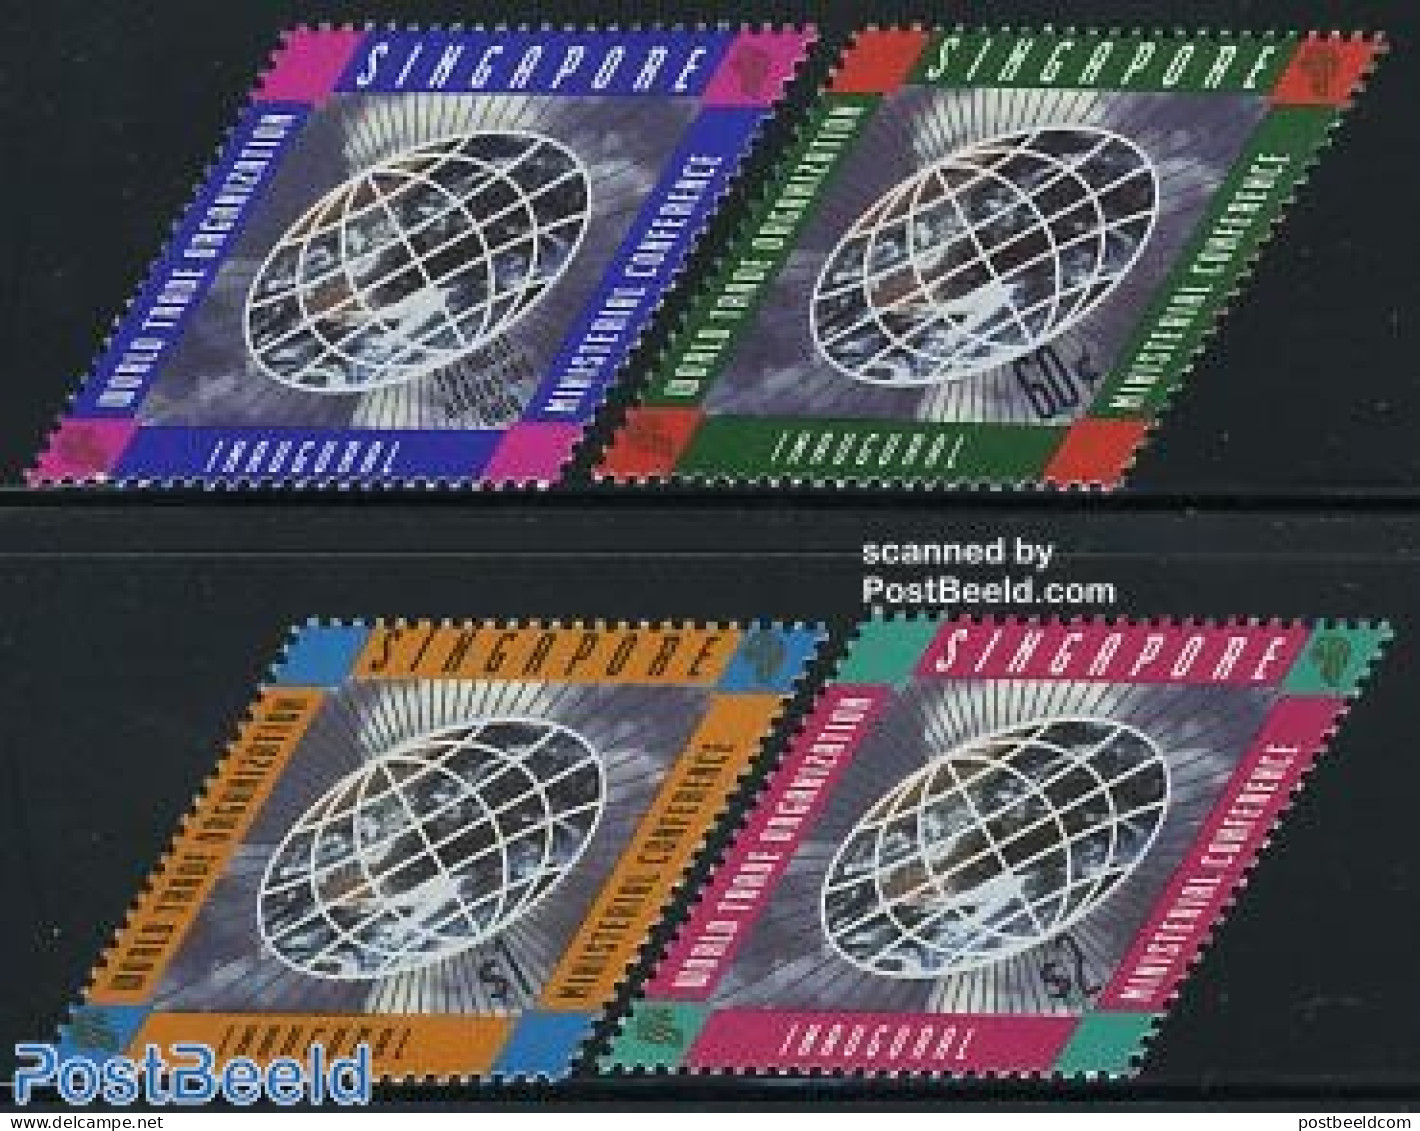 Singapore 1996 W.T.O. Conference 4v, Mint NH, Various - Export & Trade - Globes - Fabbriche E Imprese